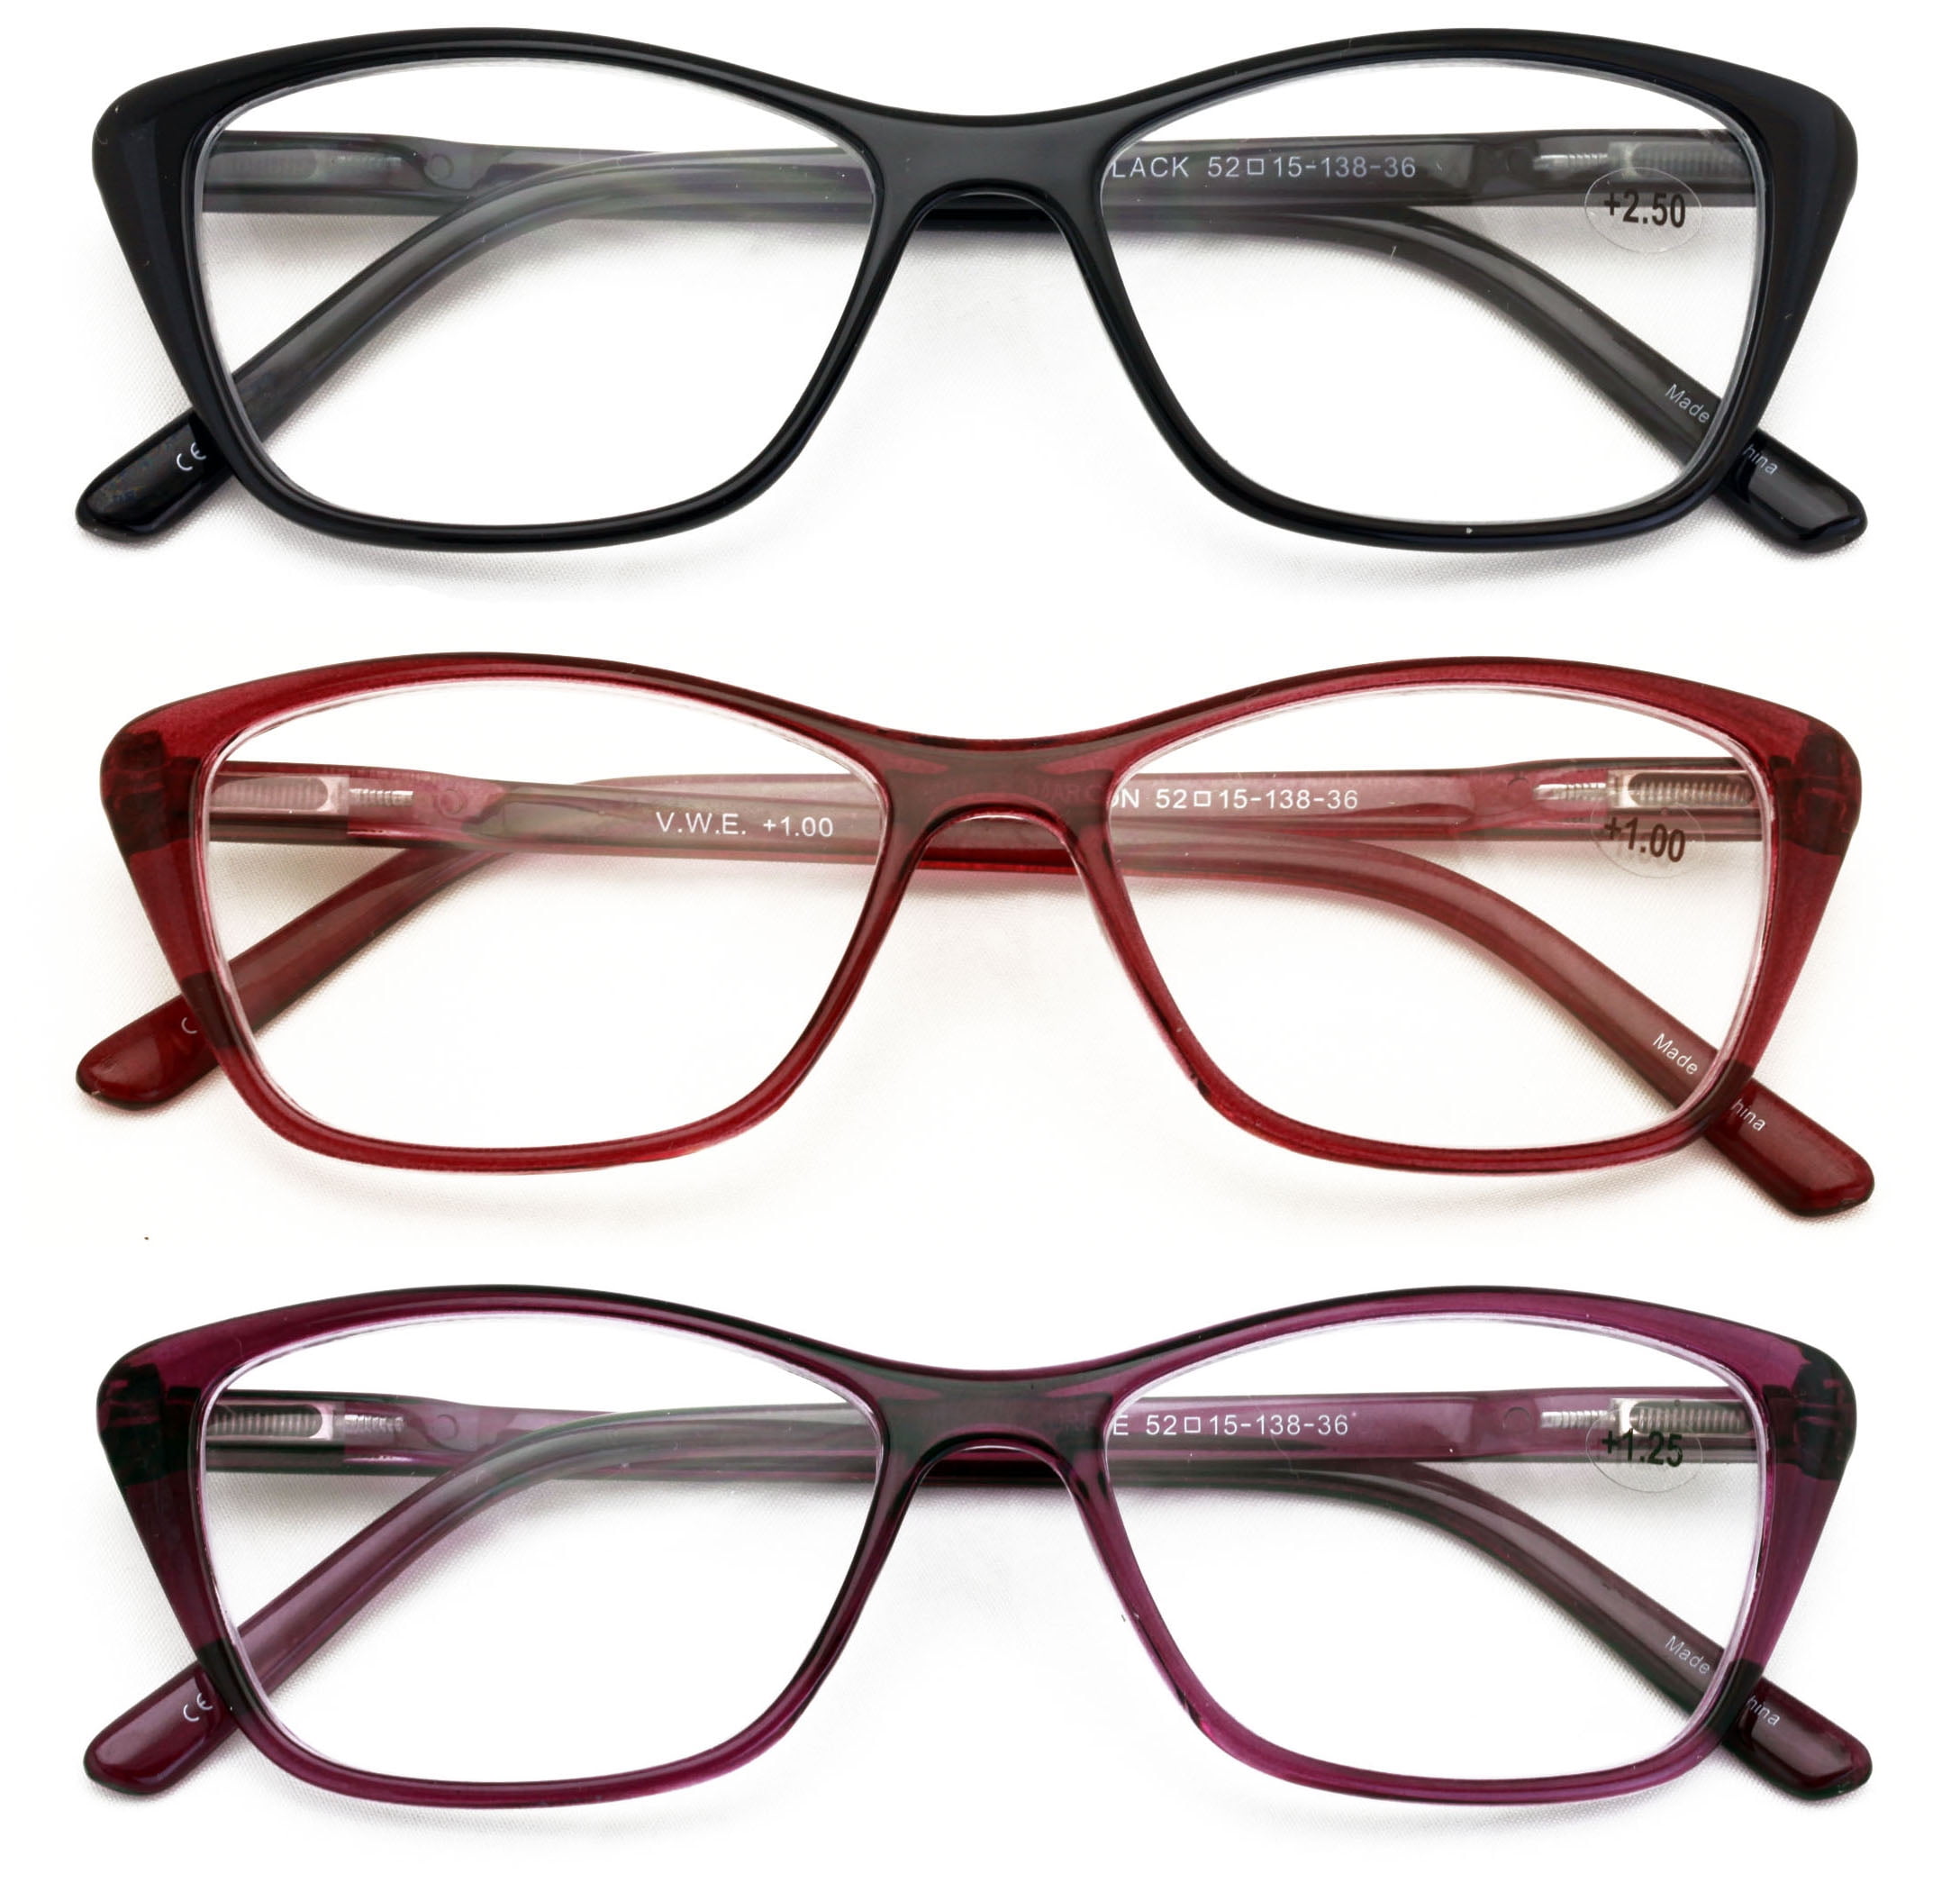 3 Pairs Women Lightweight Cateye Reading Glasses Clear Lens Reader Spring Hinge Temple 7020 1